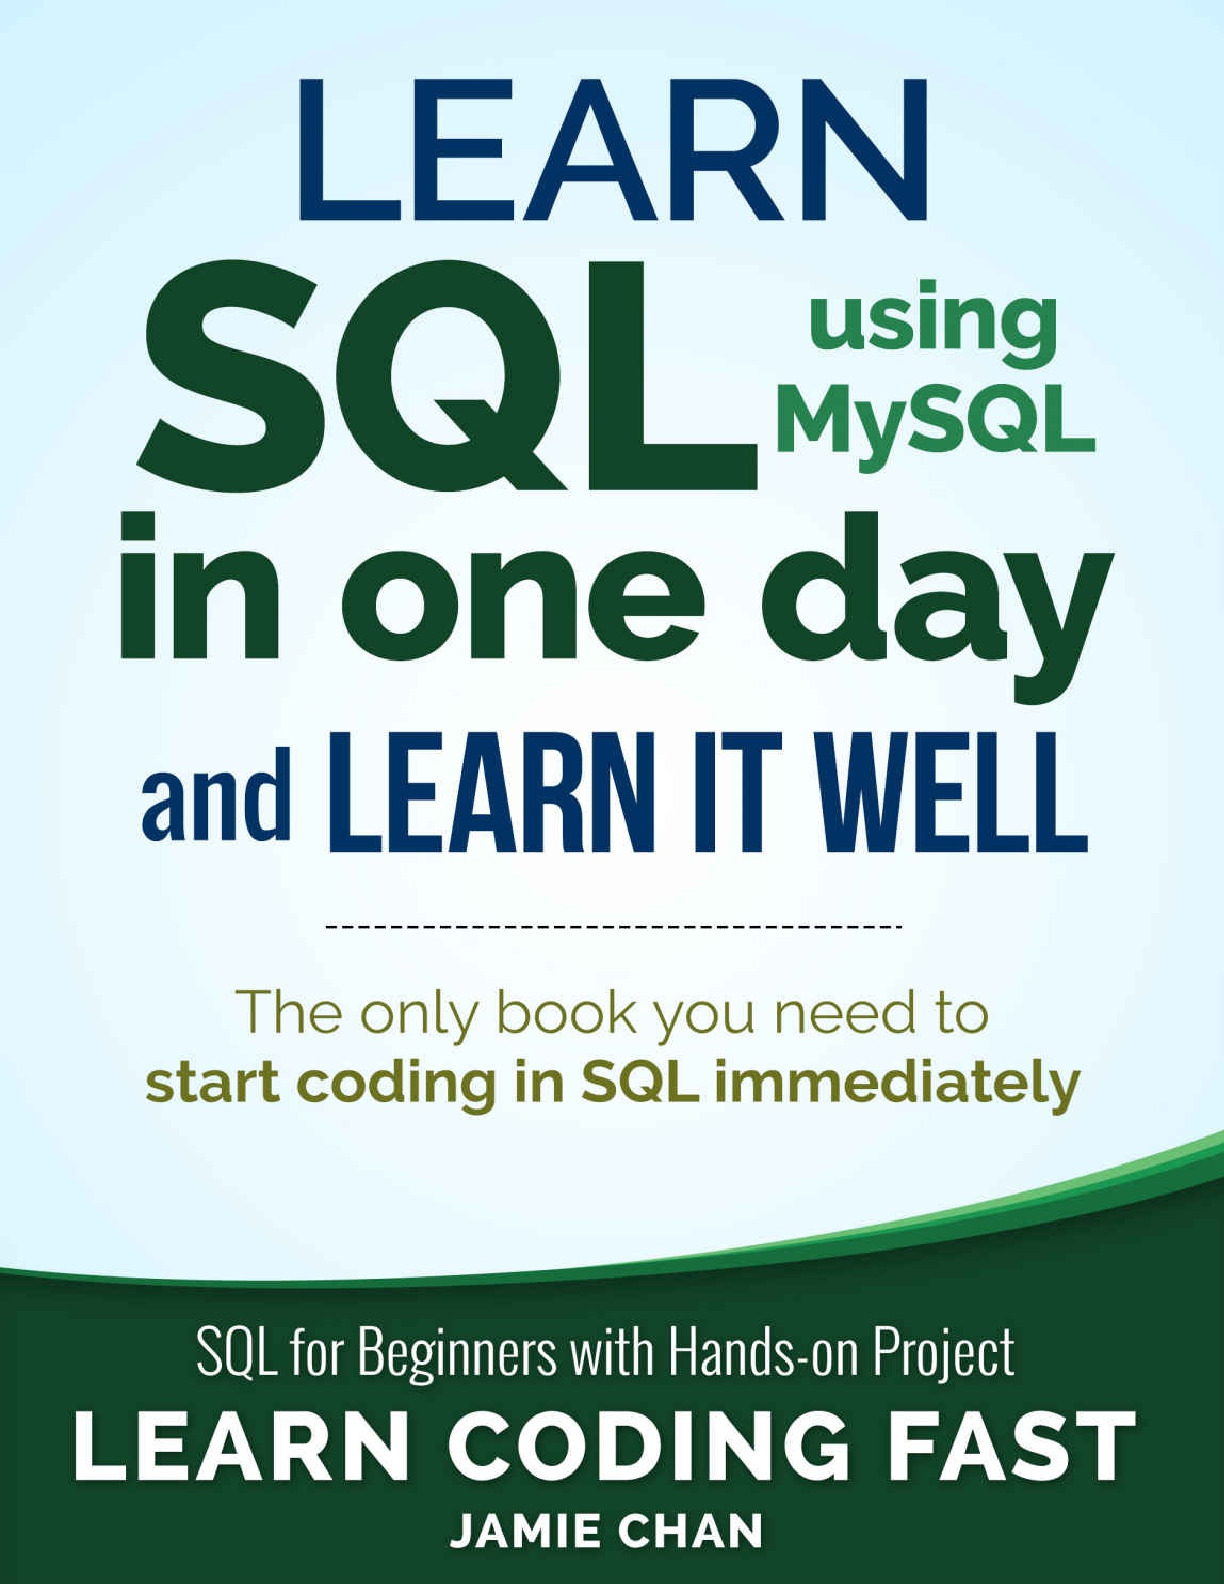 Learn SQL in One Day and Learn It Well. SQL for Beginners with Hands-on Project by Chan Jamie (z-lib.org)